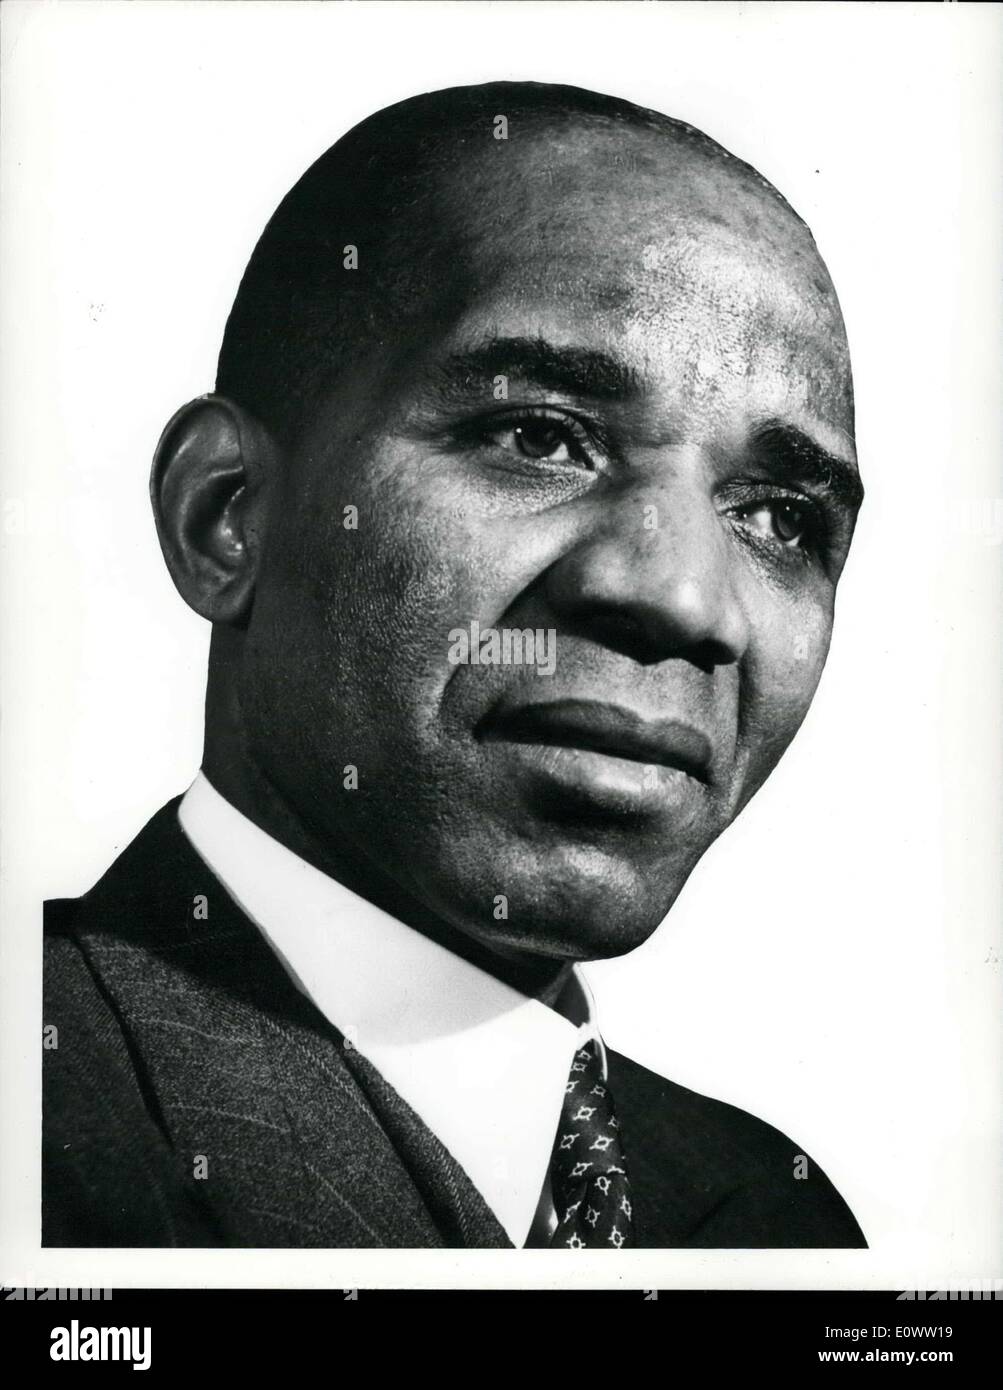 Apr. 17, 1964 - Stock Block Service: Dr. Hastings Banda, Prime Minister of Malawi. Dr . H. Banda is Prime Minister of Nyasaland, which will gain its independence in July 1964. Nyasaland, comprising Lake Nyasa and its western shore, covers 45, 747 square miles. Its population at the end of 1961 was estimated at 2,900,000 Africans, 8,800 Europeans and 12,300 Asians and non - Africans. Stock Photo